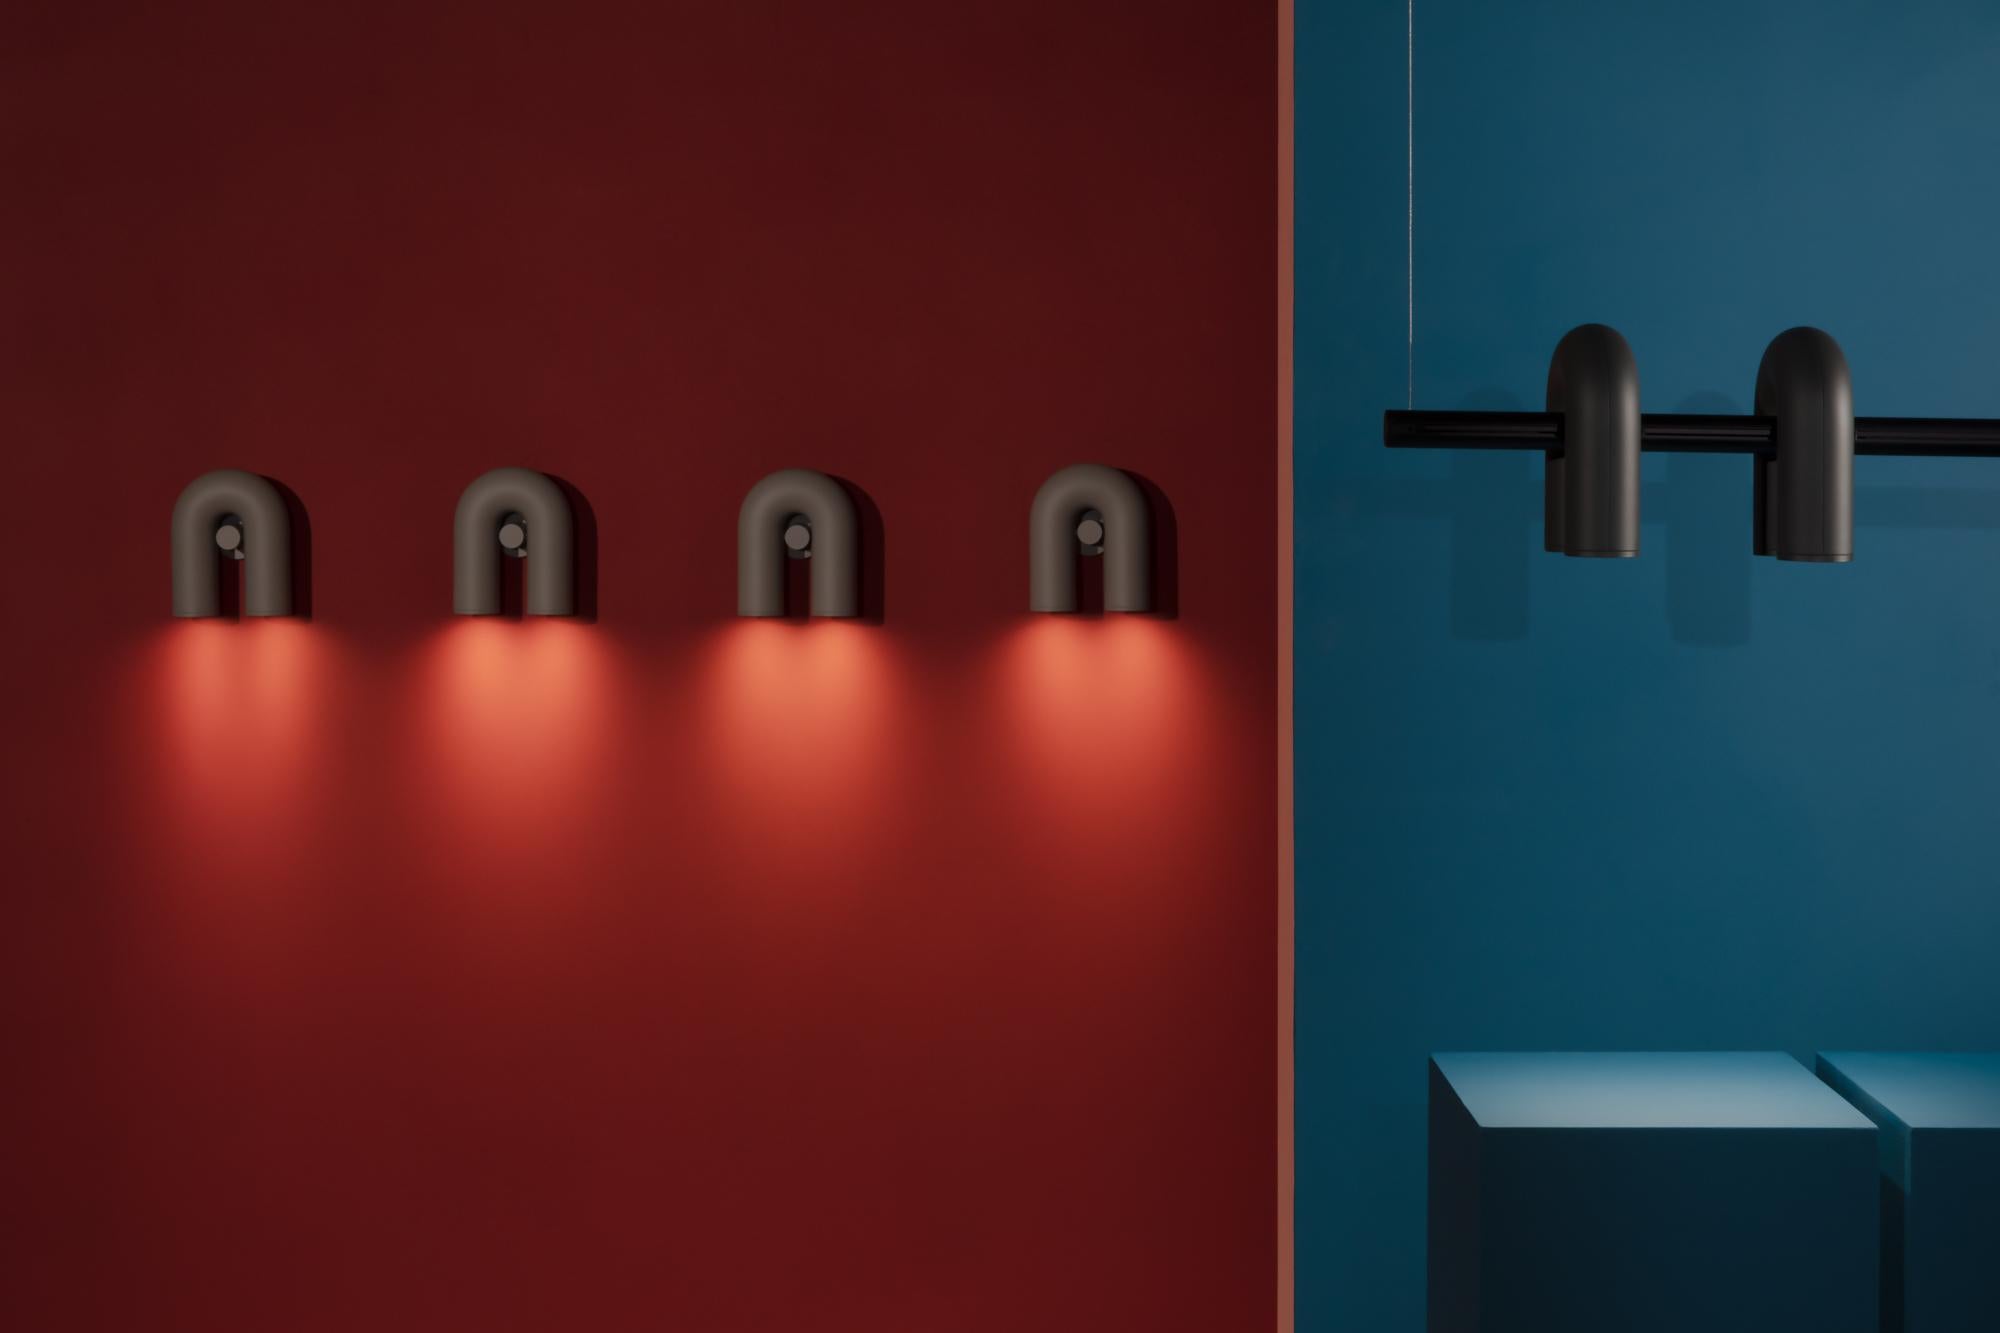 Cirkus wall lamps by AGO Lighting
Coated ABS, aluminum

UL Listed
LED GU10 110-240V (not included)

Four colors available: Charcoal, grey, green, terracotta
Dimensions: 18 x 14,8 x 7,8 cm

--
AGO is a Korean design studio specialized in lighting.